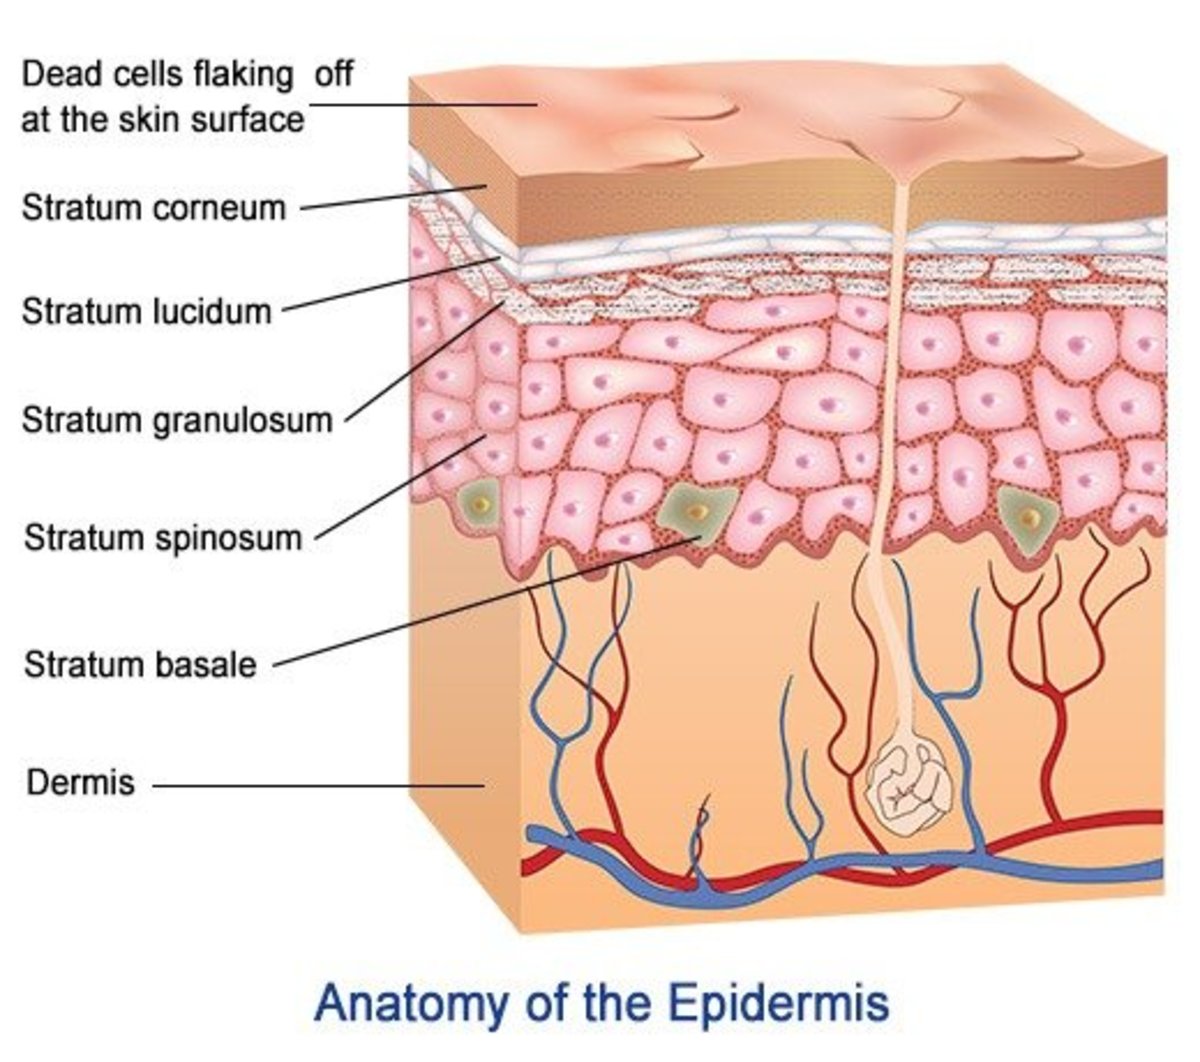 5 Layers And Cells of the Epidermis | HubPages